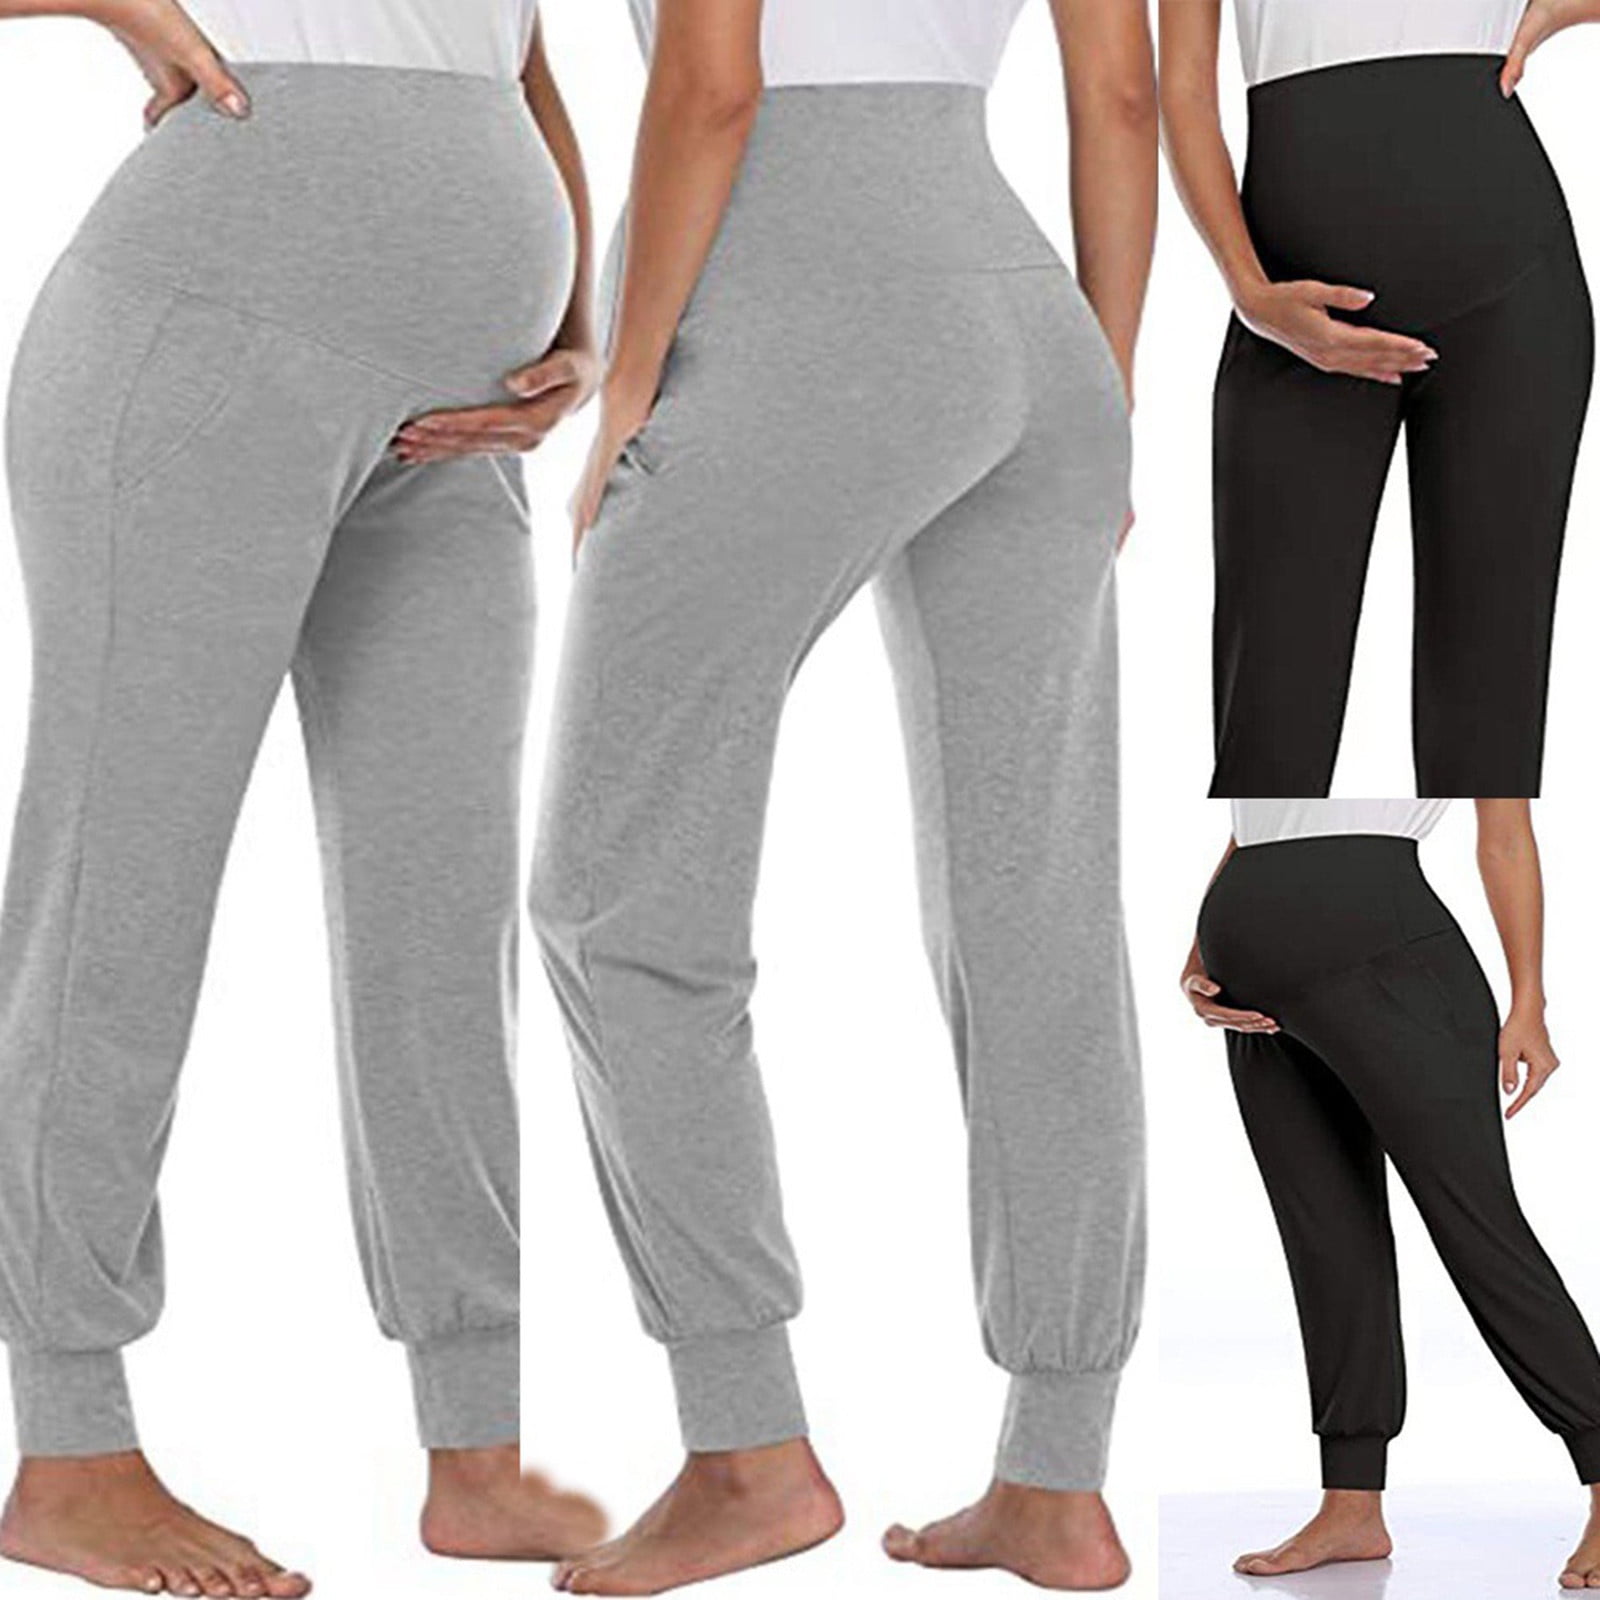 Women's black Maternity Pants Activewear Jogger Track Cuff Sweatpants Over  The Belly Stretchy Pregnancy Pants for work lounge - AliExpress